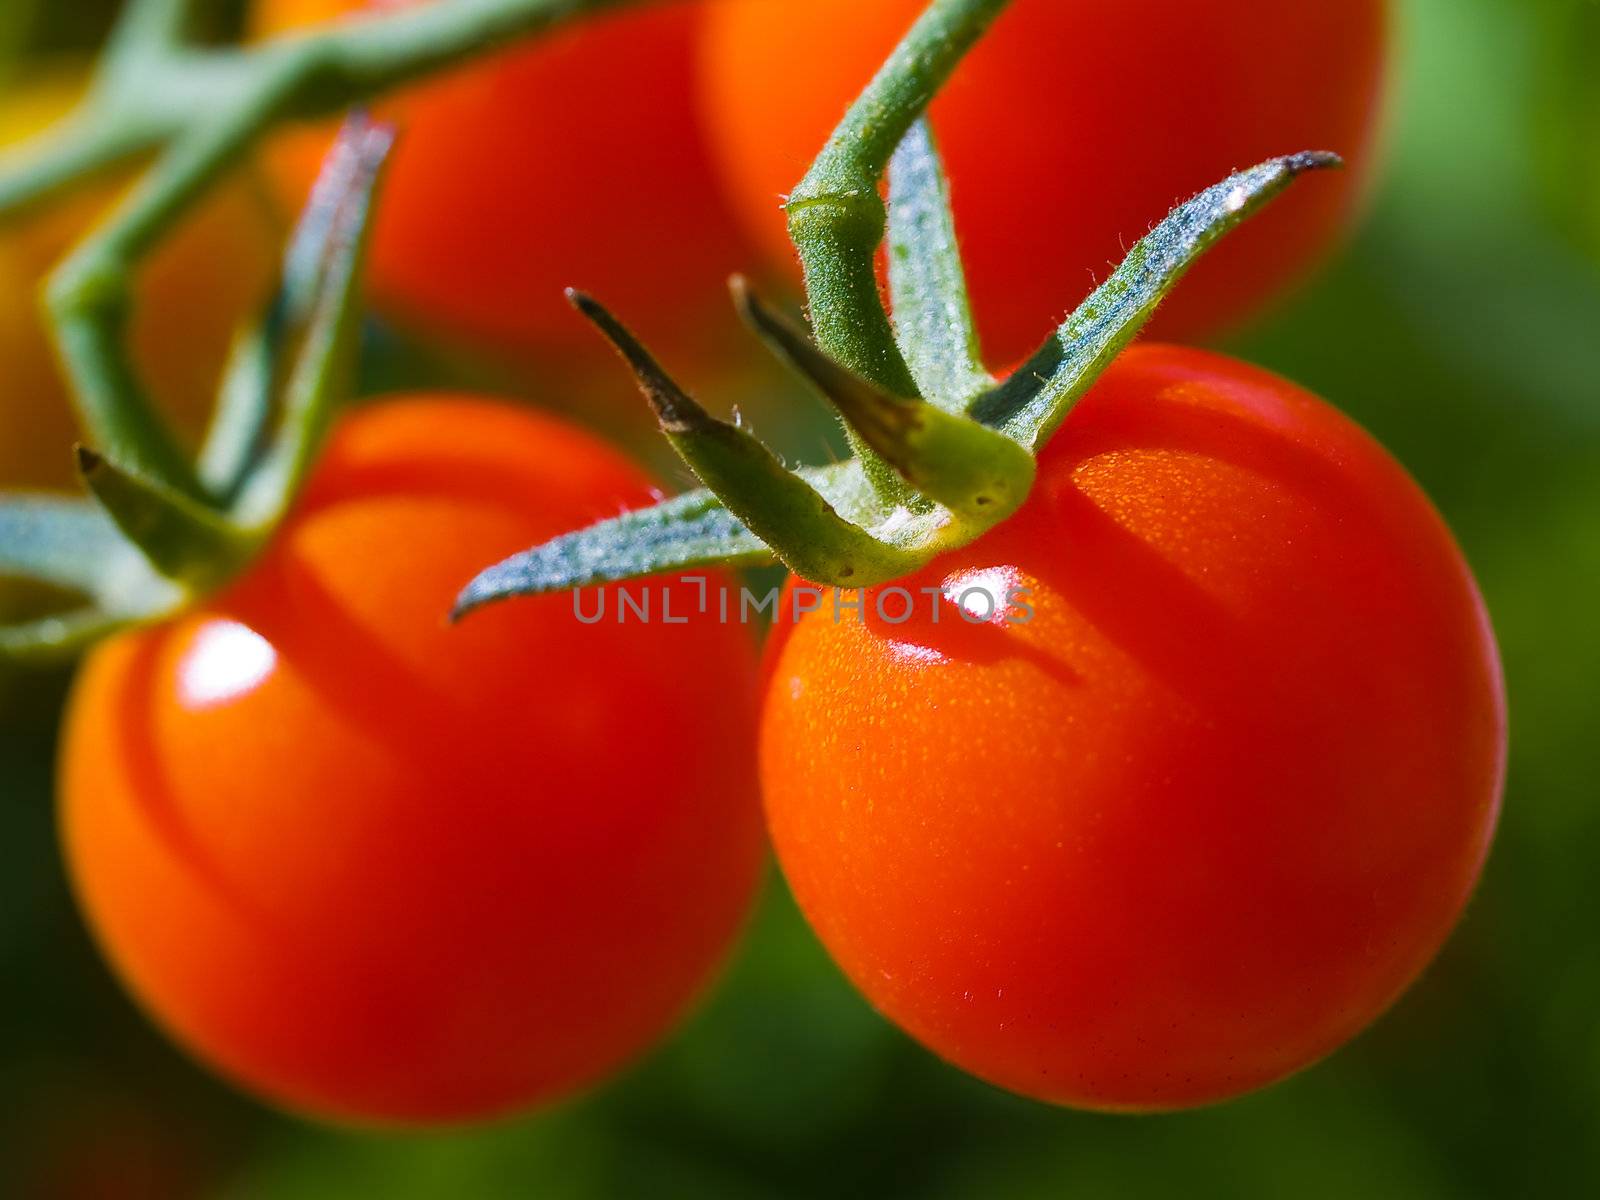 Red Ripe Tomatoes on the Vine by Frankljunior